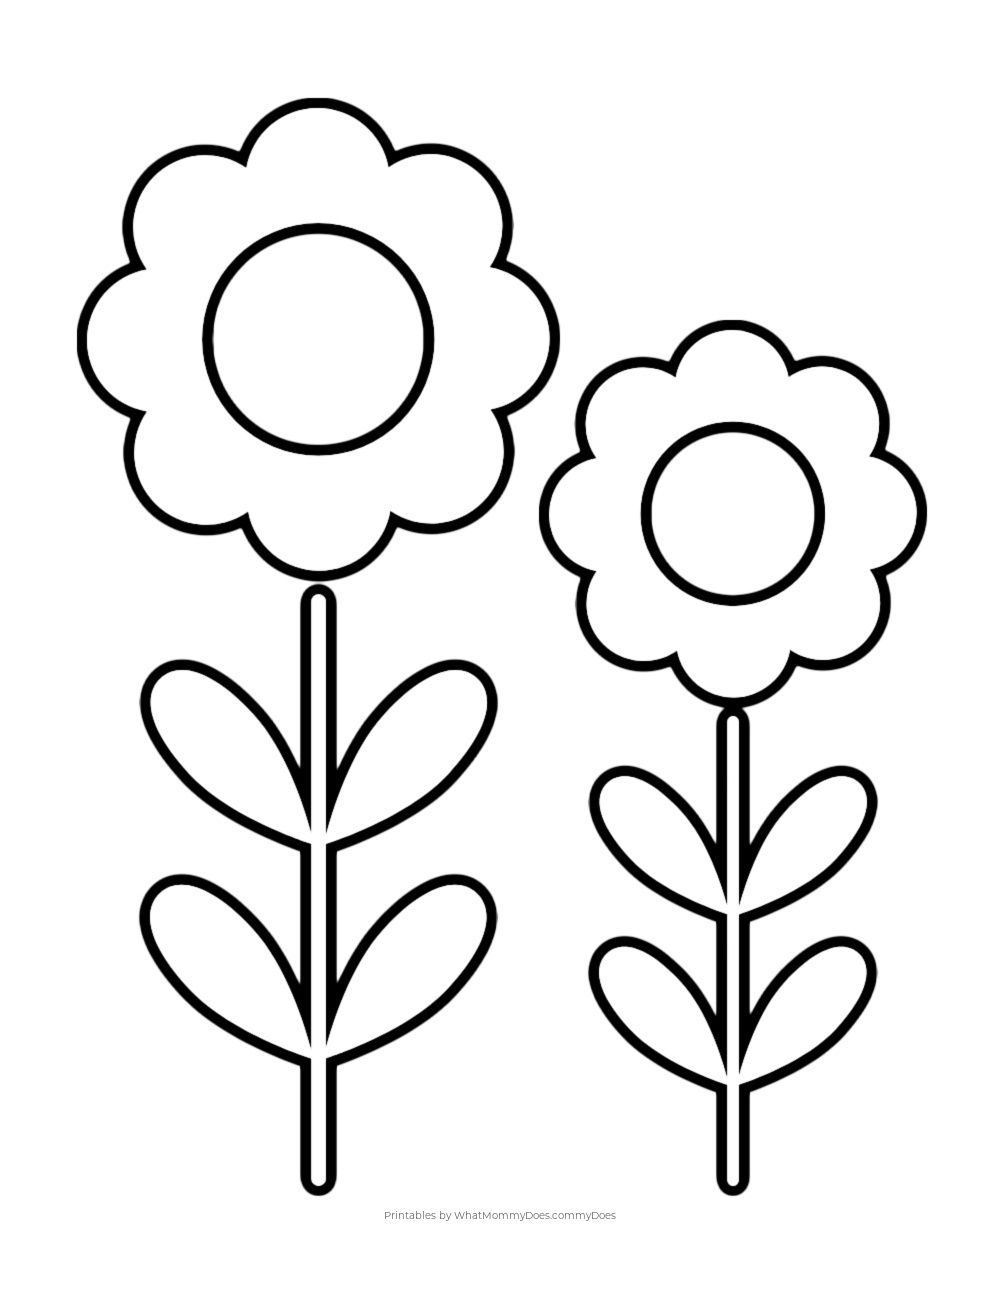 Simple flower coloring page easy for kids flower coloring pages coloring pages coloring pages for kids